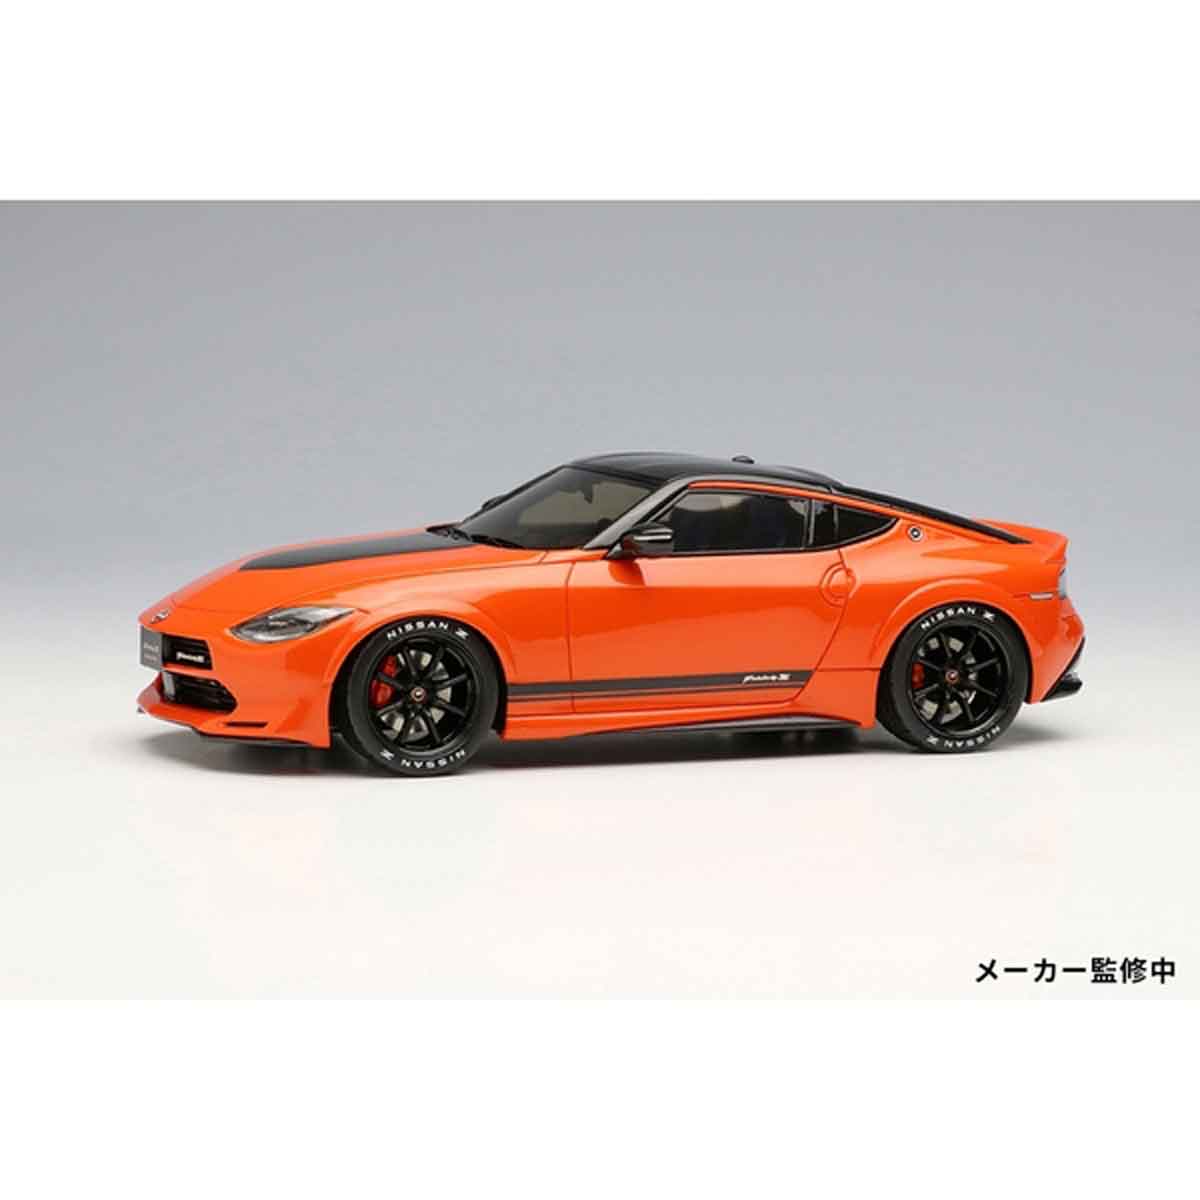 Make Up(メイクアップ) 日産 フェアレディZ カスタマイズドプロト 東京